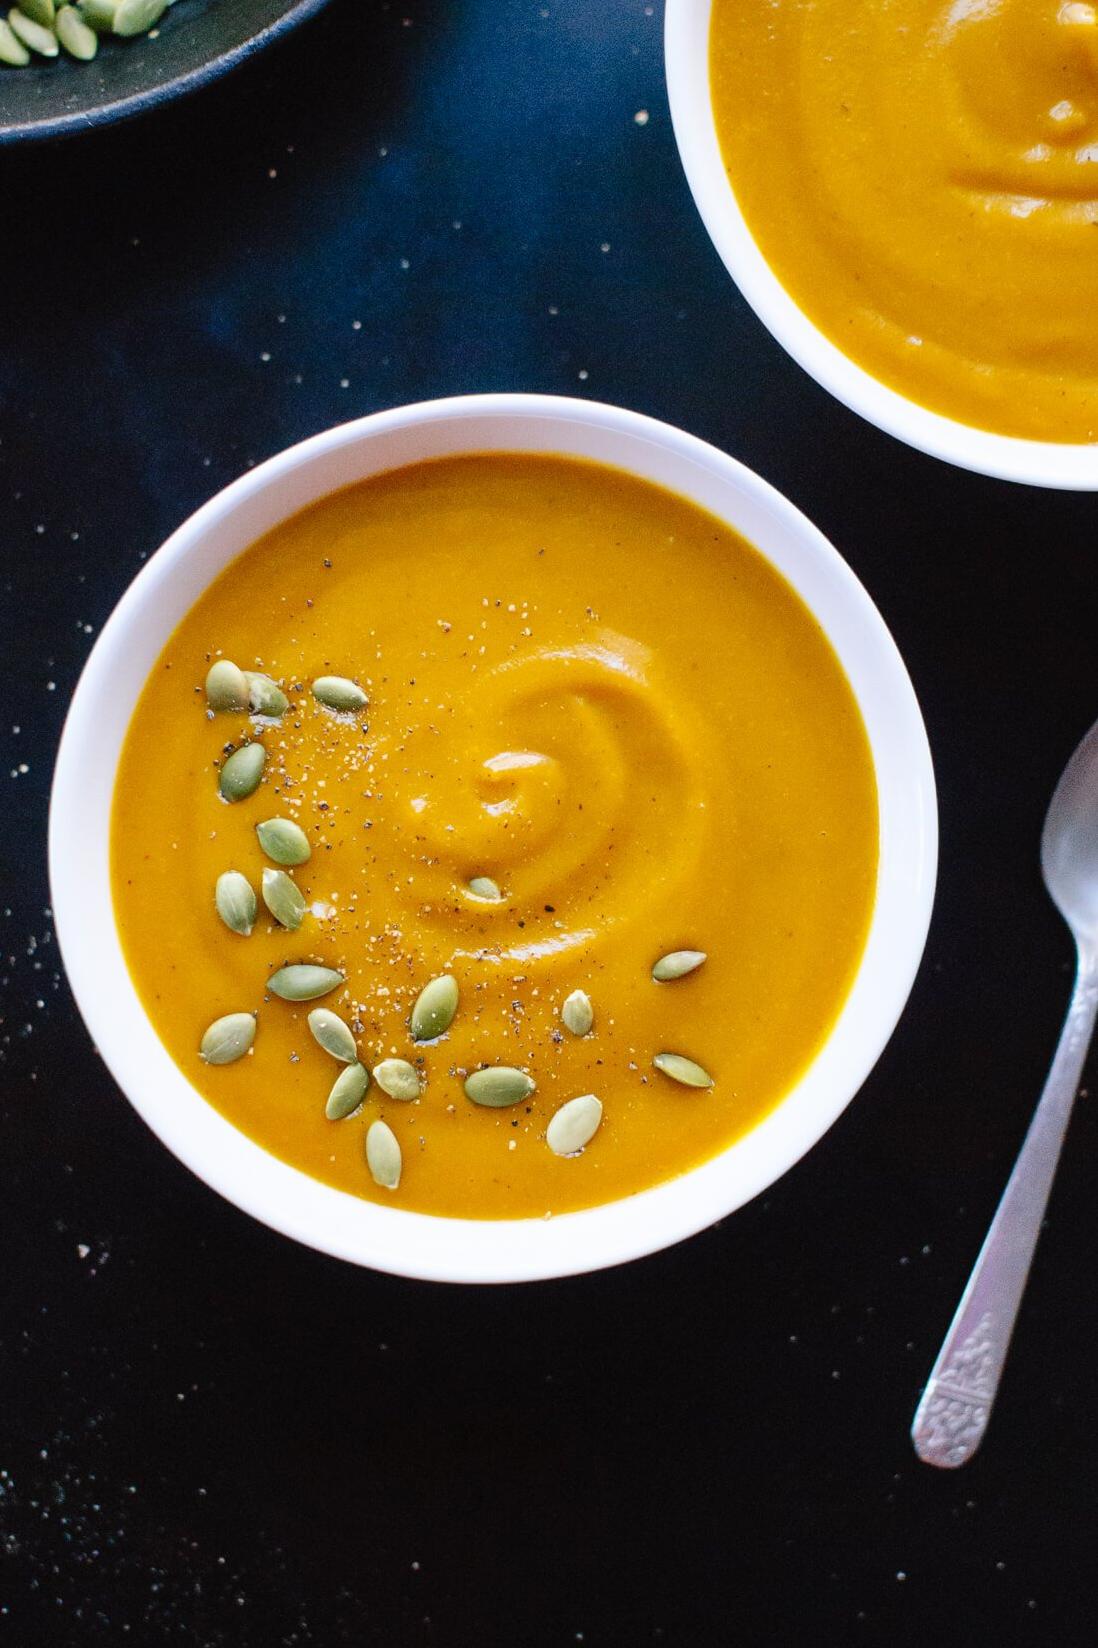  Add a touch of elegance to your dinner with creamy pumpkin soup